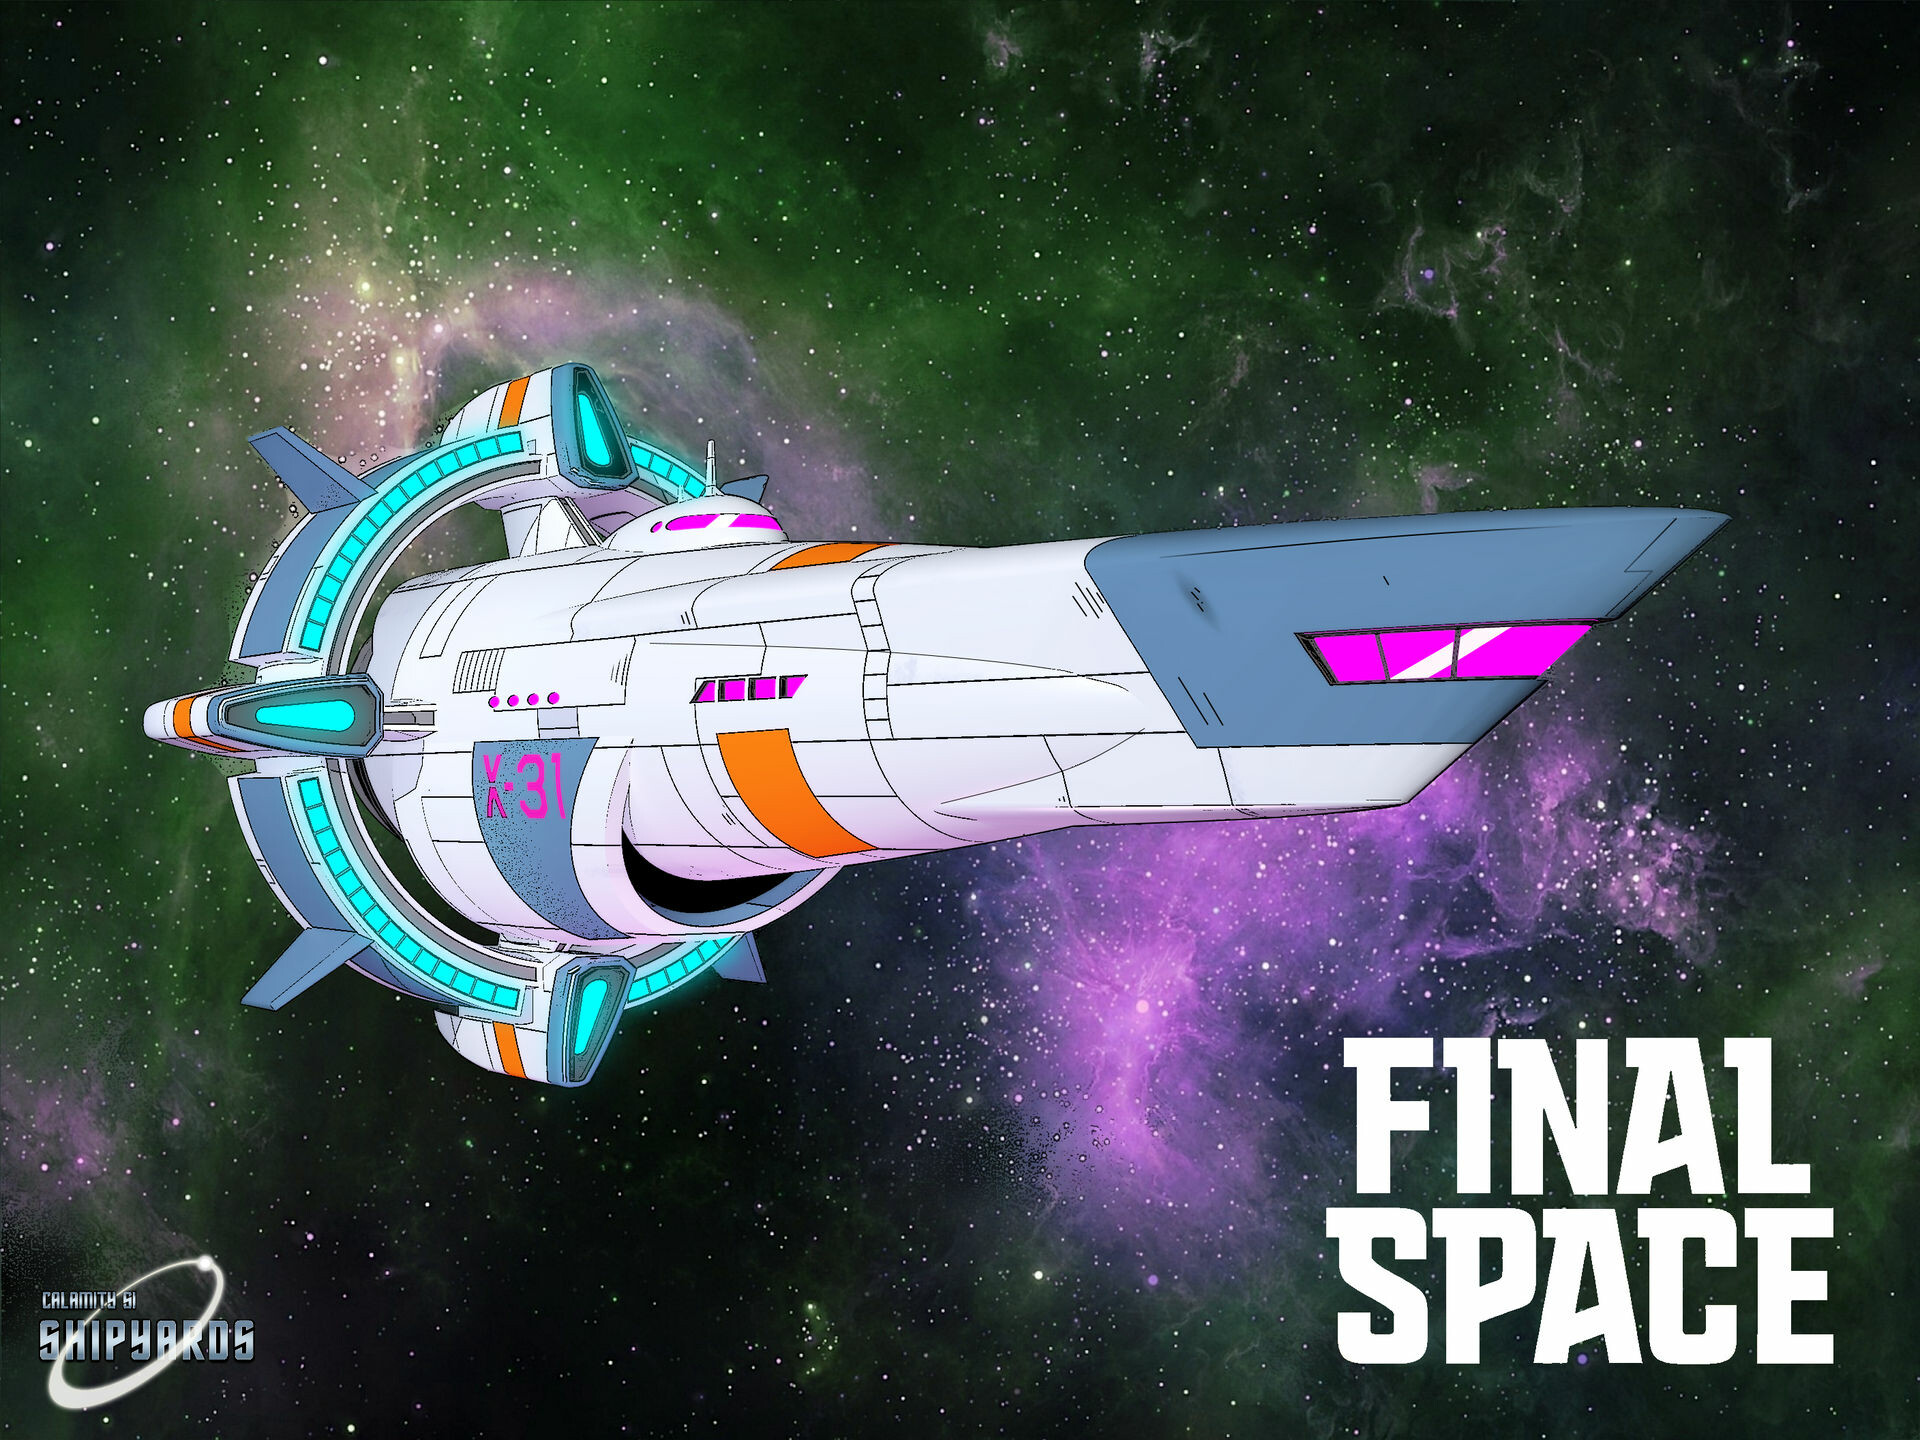 16cm of Galaxy One spaceship from Final Space Details about   3D Printed Model 6,3" 